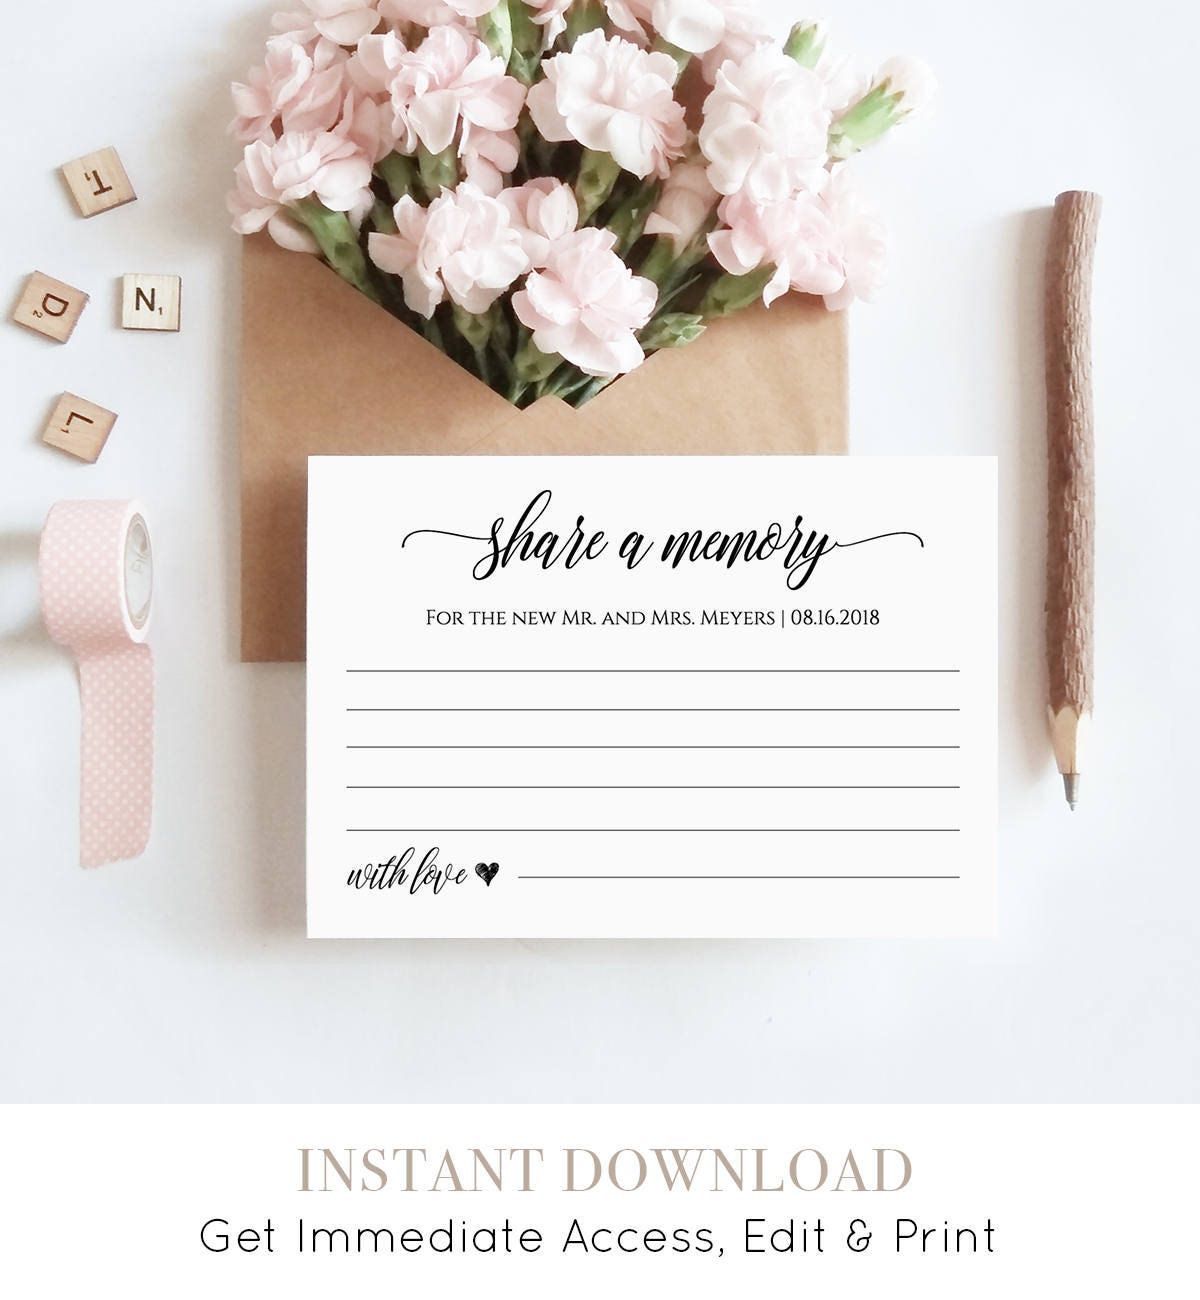 Share a Memory Printable Card, Wedding Advice Template for Regarding In Memory Cards Templates